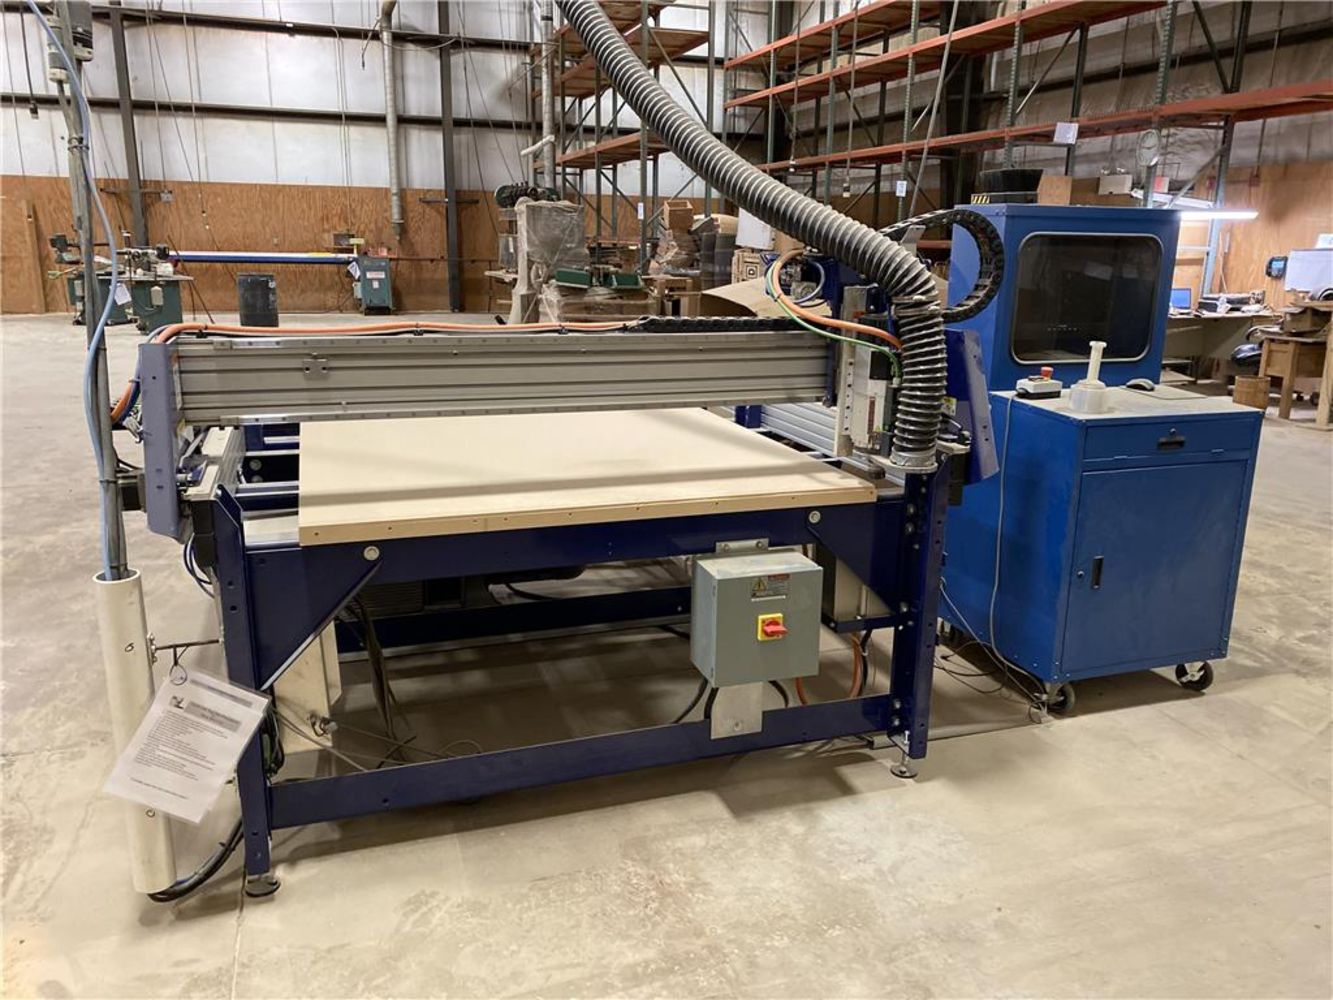 22-3 LATE MODEL CNC ROUTER TABLES - WOOD PRODUCTION & SUPPORT EQUIPMENT - CLARK FORKLIFT - WALKIE STACKER - NEW CARDBOARD BOX INVENTORY - CEDAR